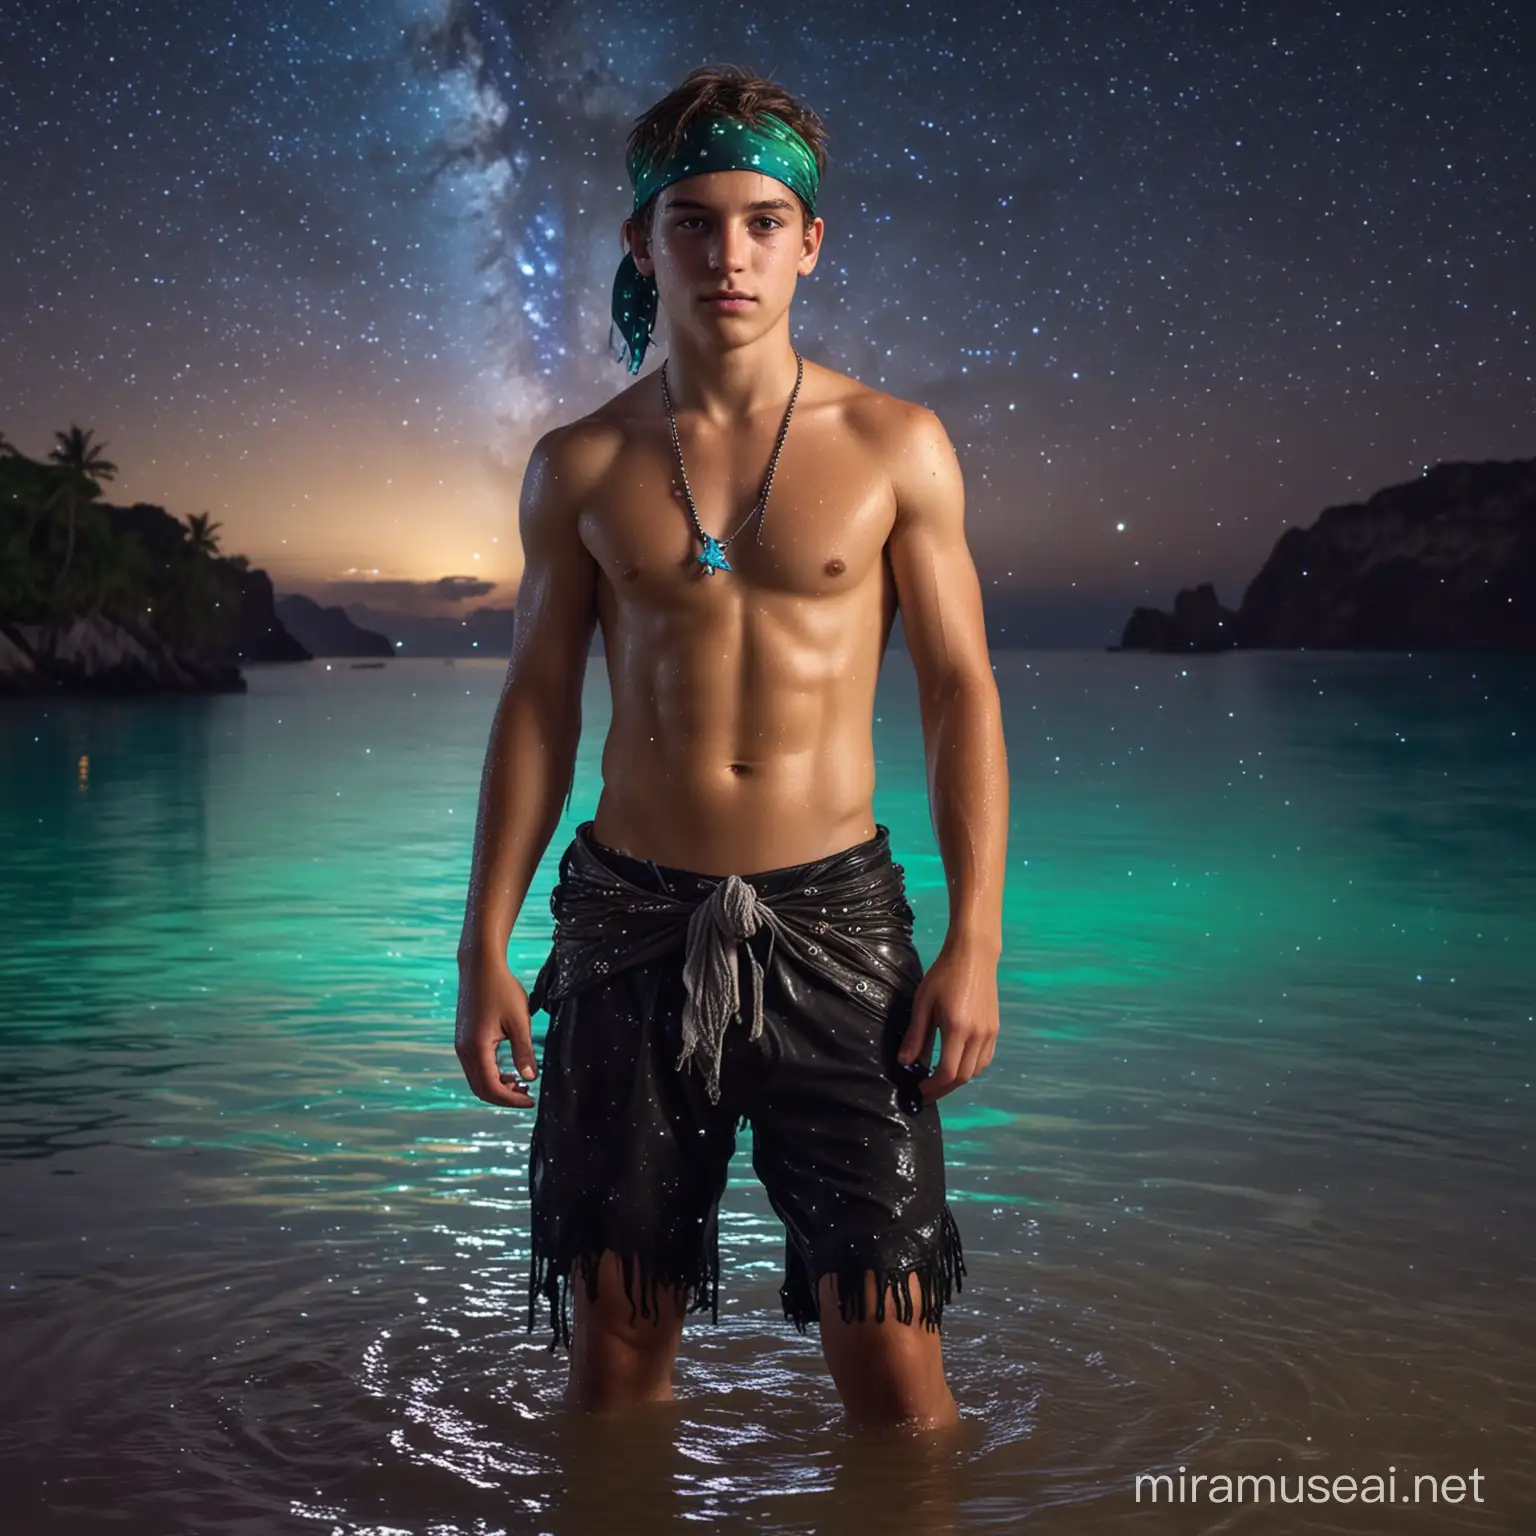 A sexy shirtless muscular sweaty wet teen pirate boy. The boy must be a teenager very athletic and muscled. The boy wears a bandana and he has his feet on the water of an oasis of a heavenly island. At night. With blue and green neon colors ambient. The sky is full of stars with a huge galaxy.